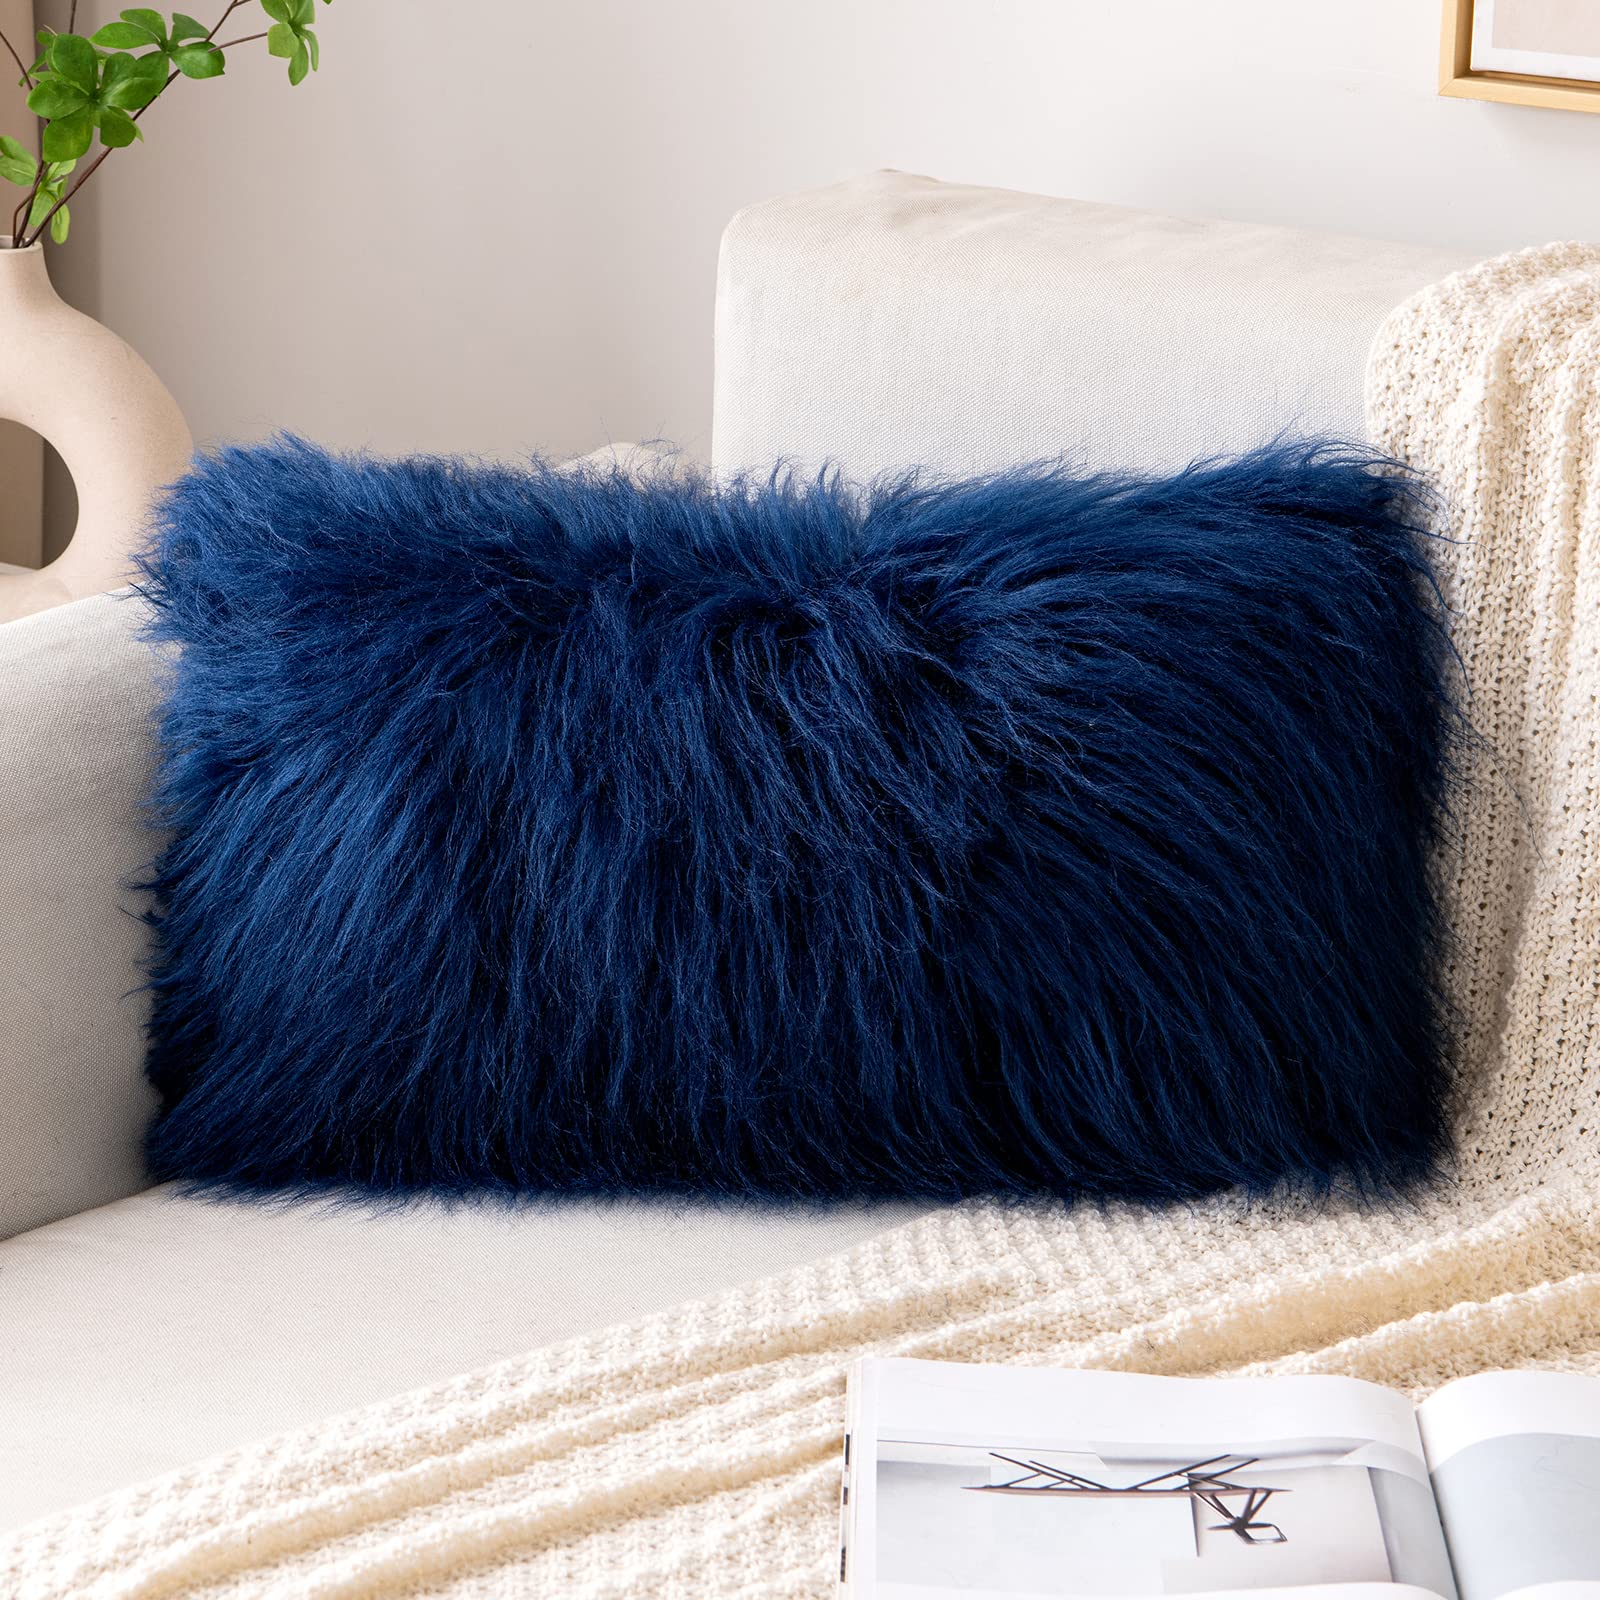 Book Cover MIULEE Decorative New Luxury Series Style Navy Blue Faux Fur Throw Pillow Case Cushion Cover for Sofa Bedroom Car 12 x 20 Inch 30 x 50 cm 12 Inchx20 Inch Navy Blue